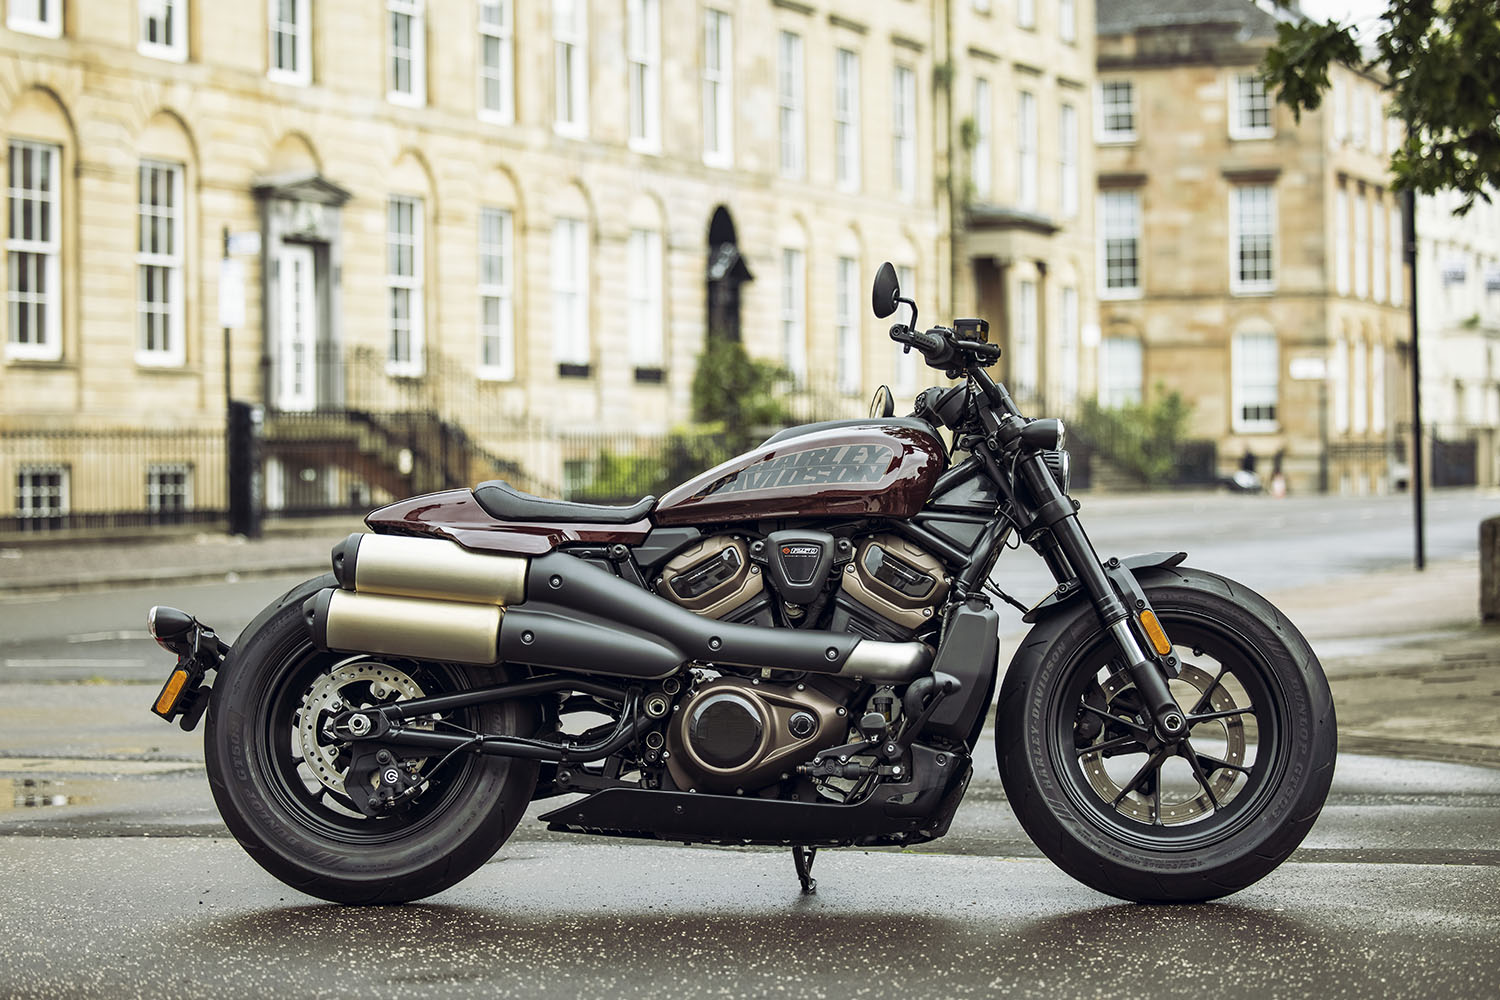 2021 Harley Davidson Sportster S First Look Review Rider Magazine